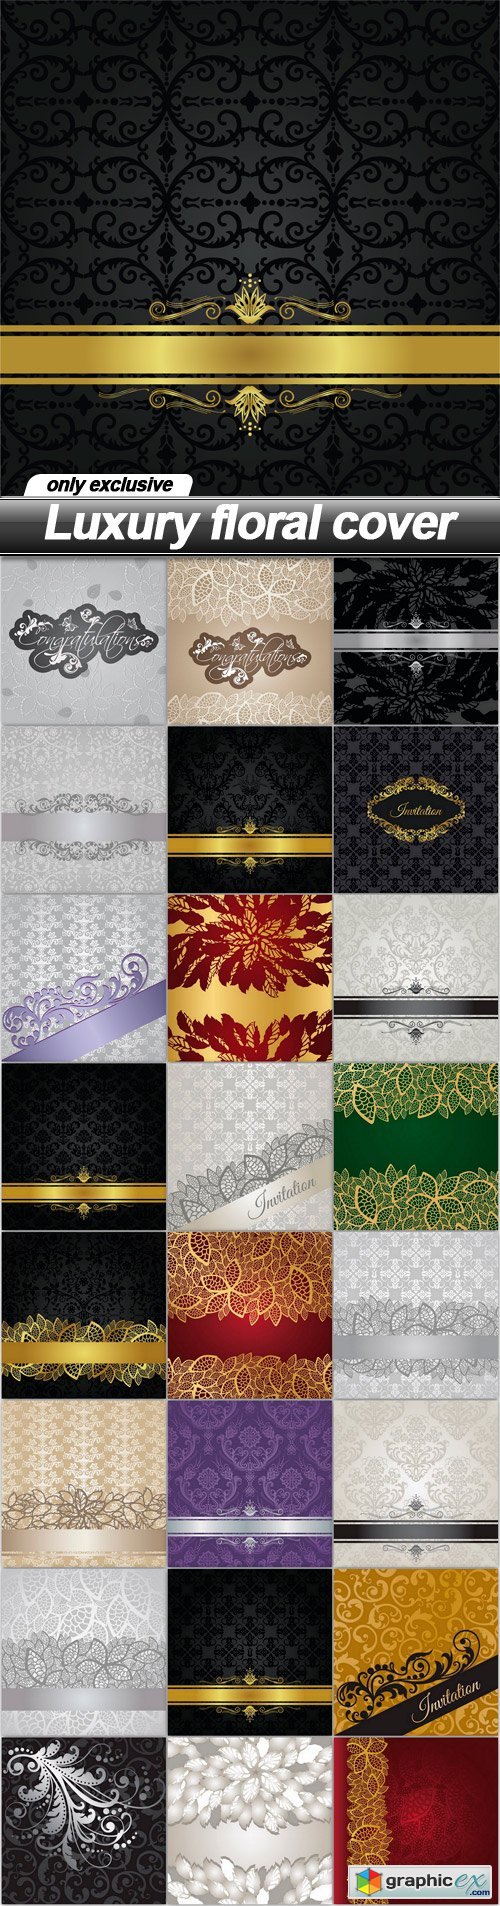 Luxury floral cover - 25 EPS